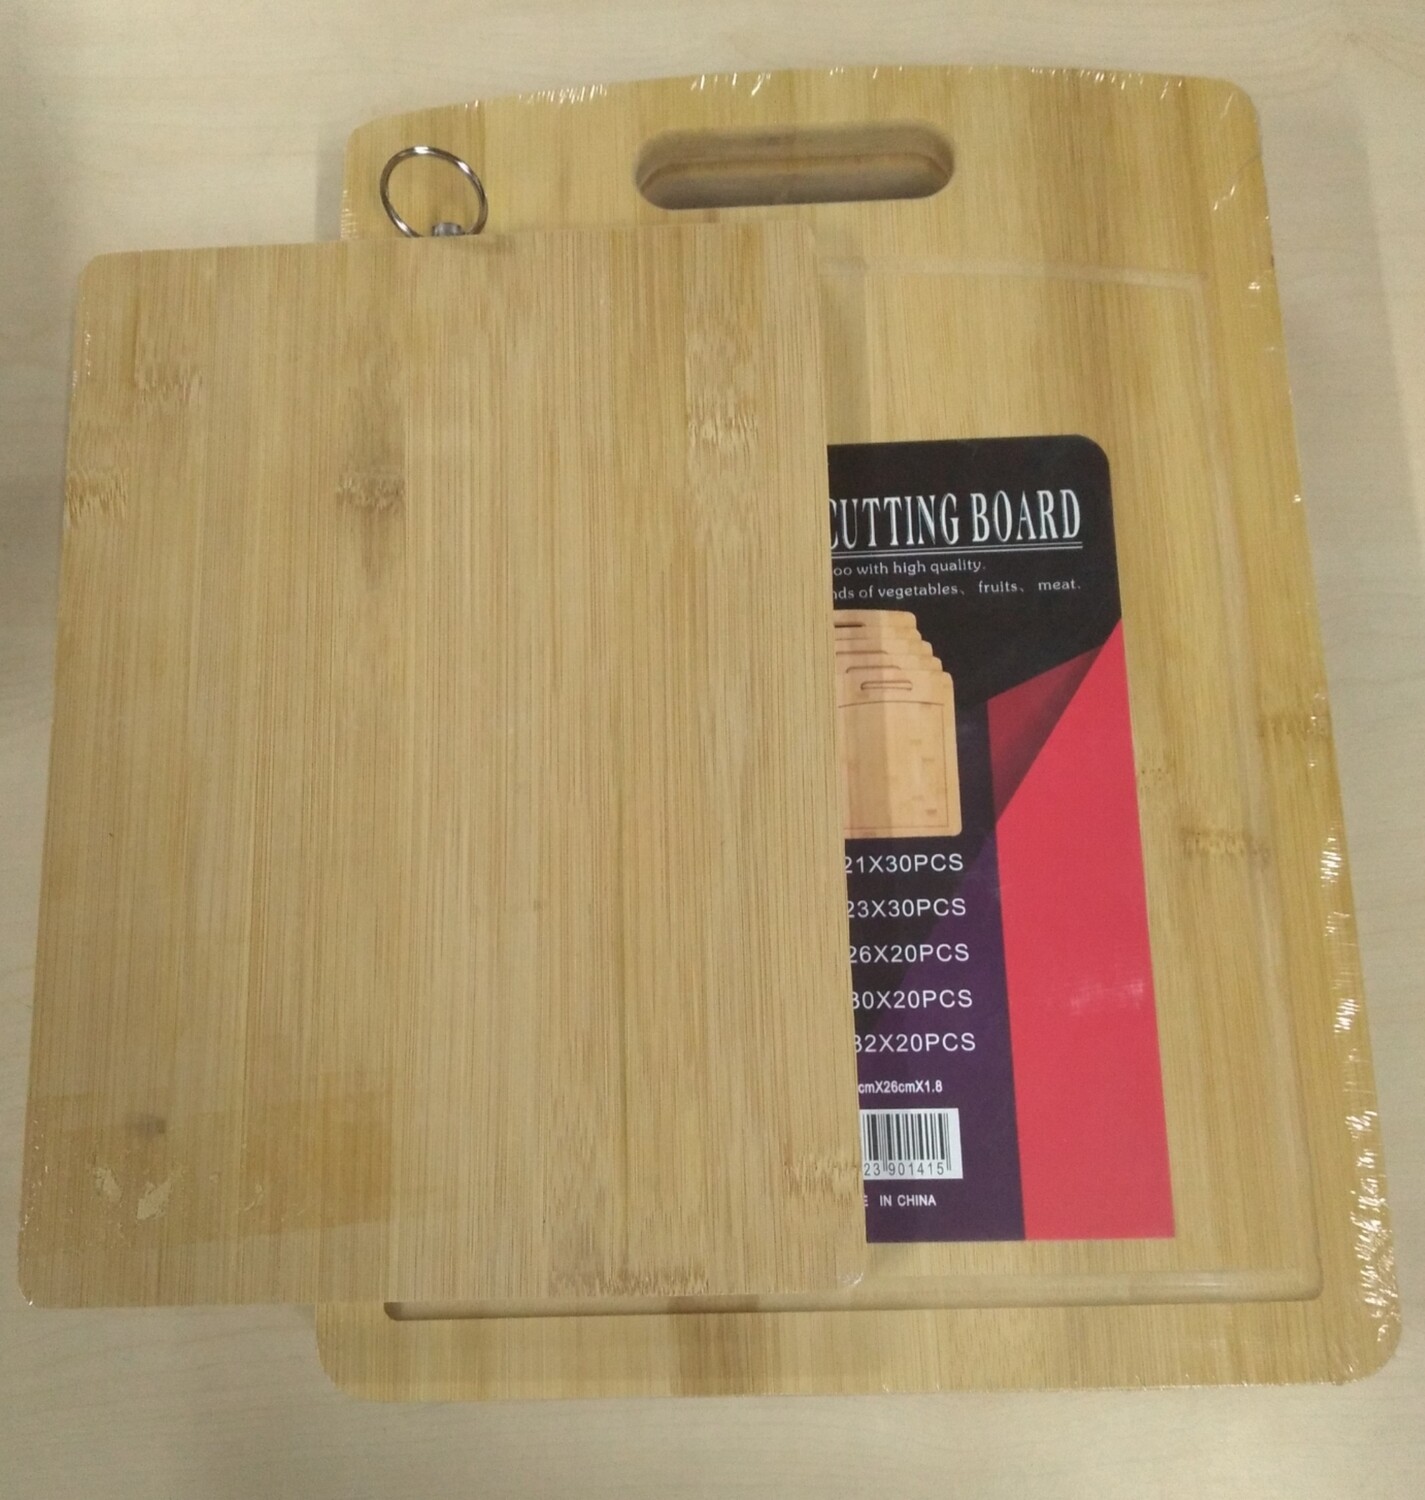 Bamboo chopping board set large size 26x36CM & Small size 20x28CM